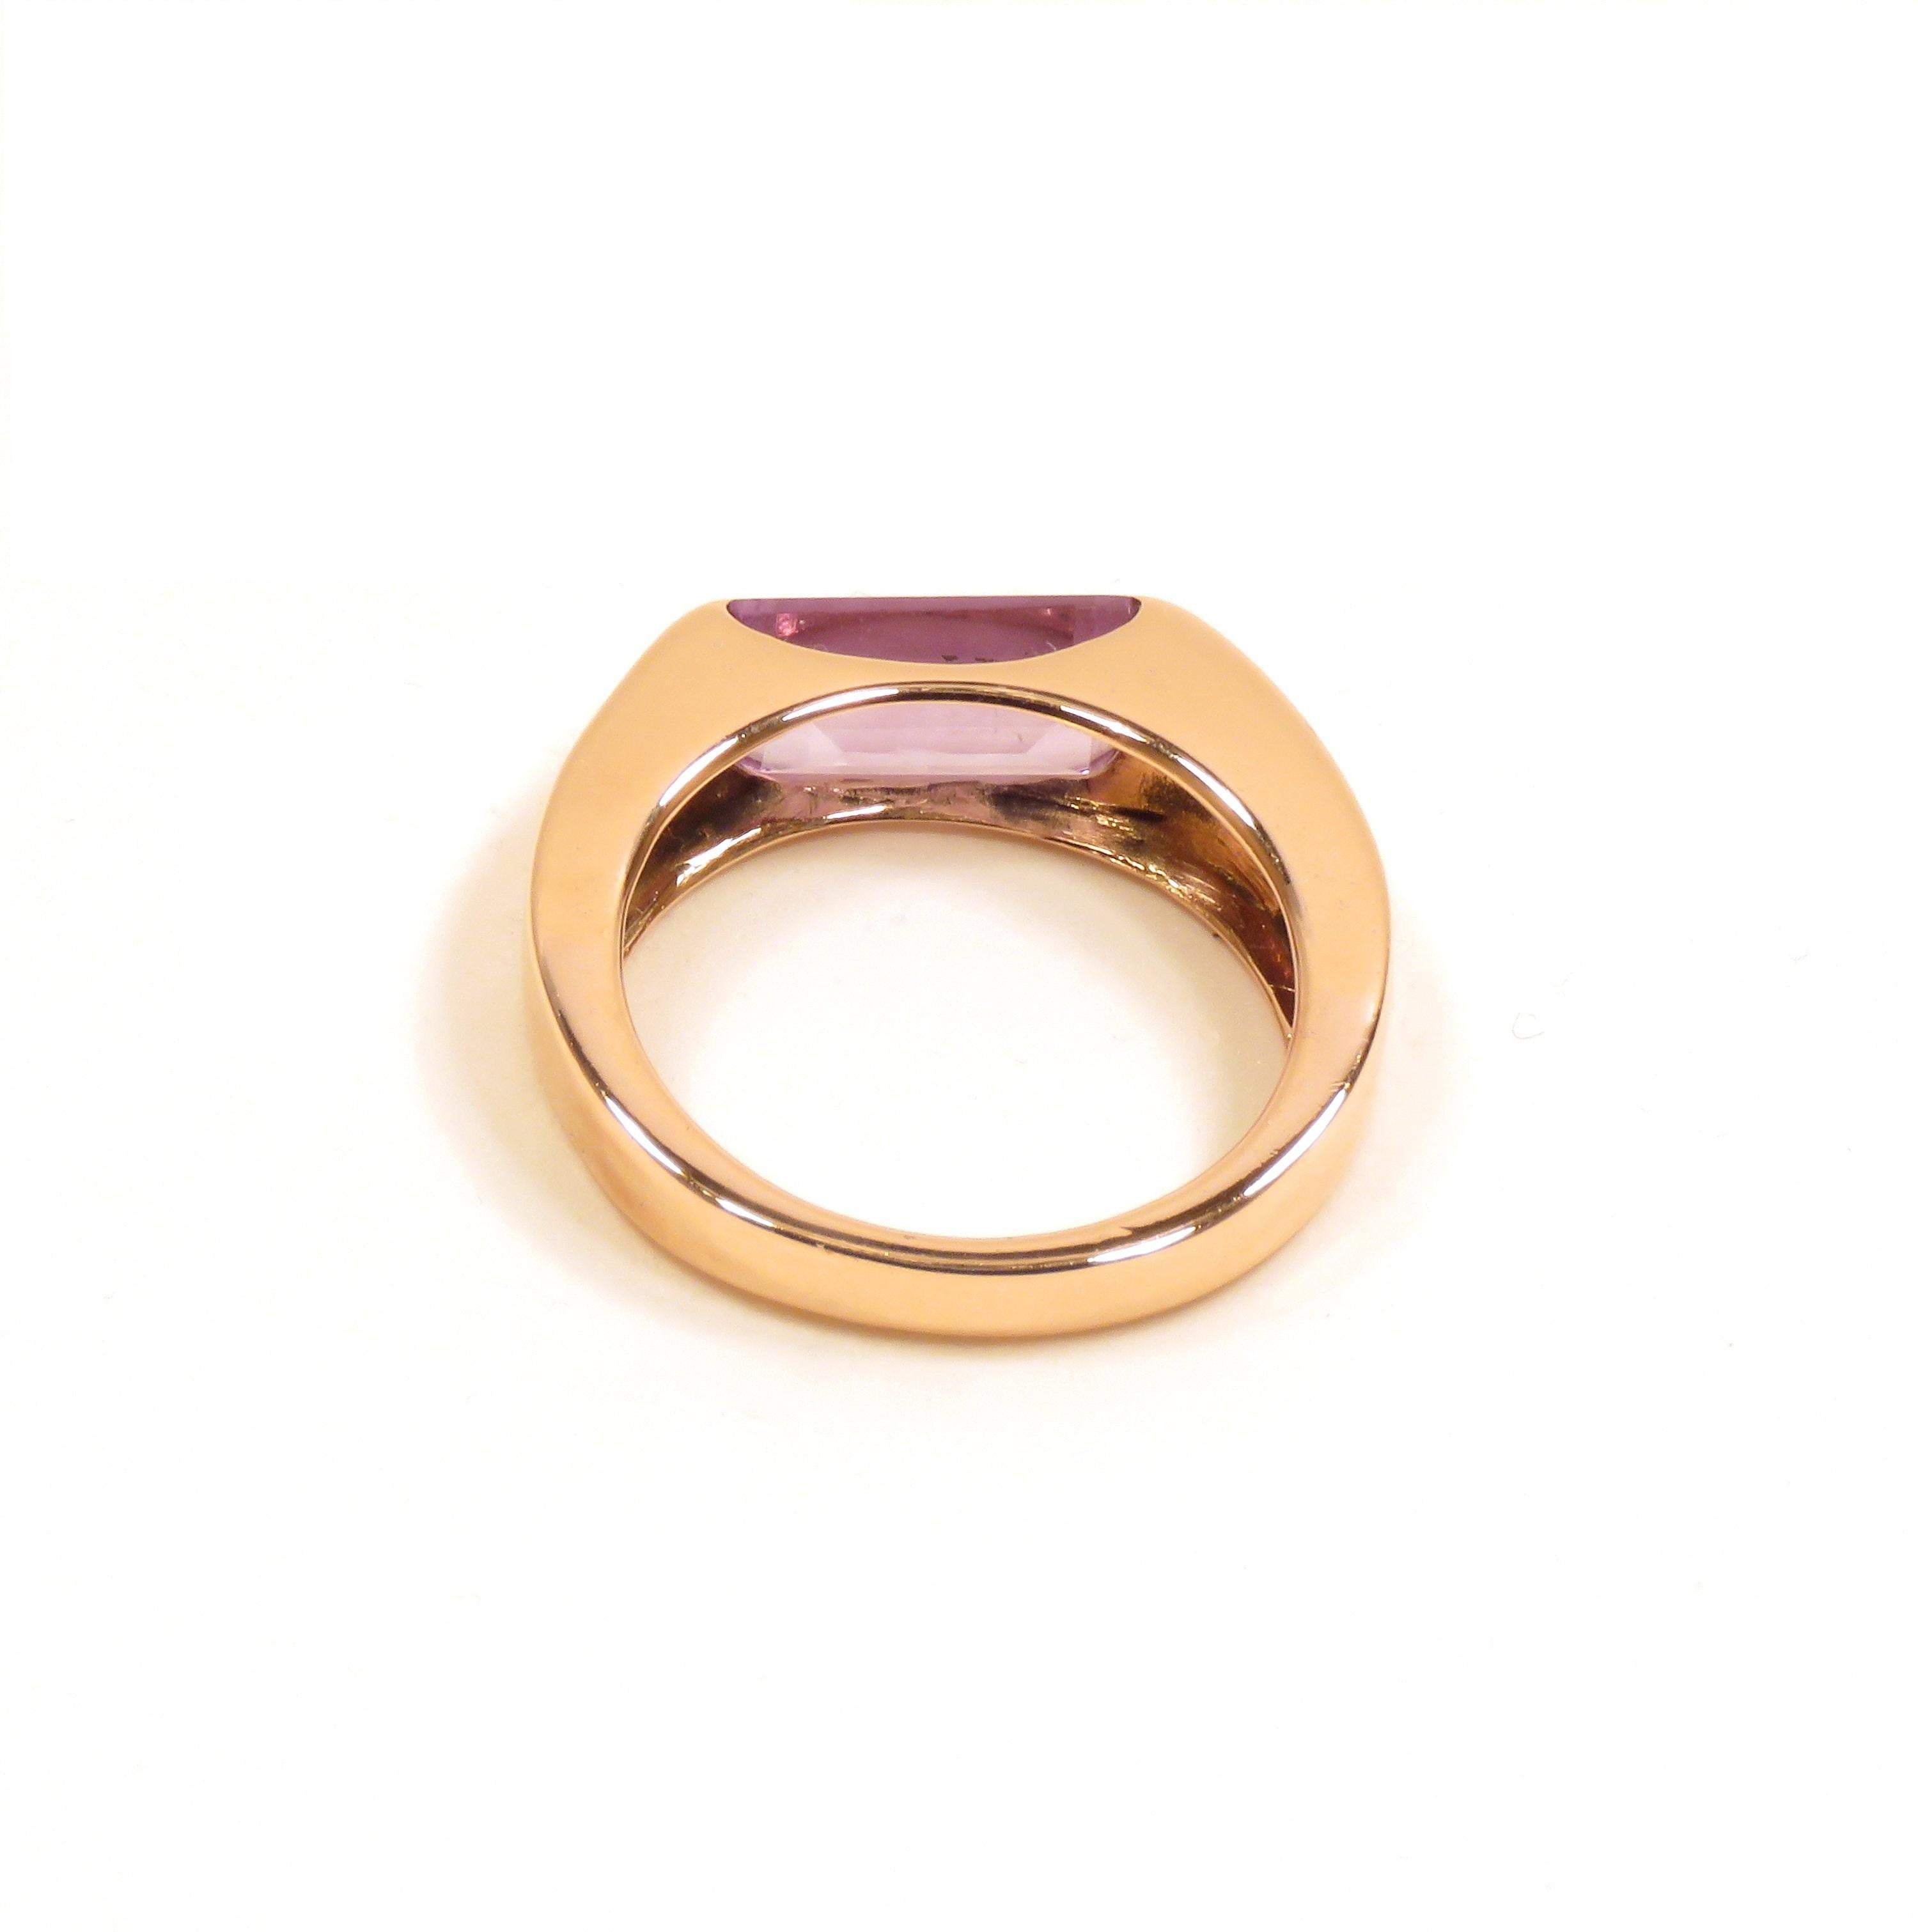 Women's Amethyst Rose Gold Band Ring Handcrafted in Italy by Botta Gioielli For Sale